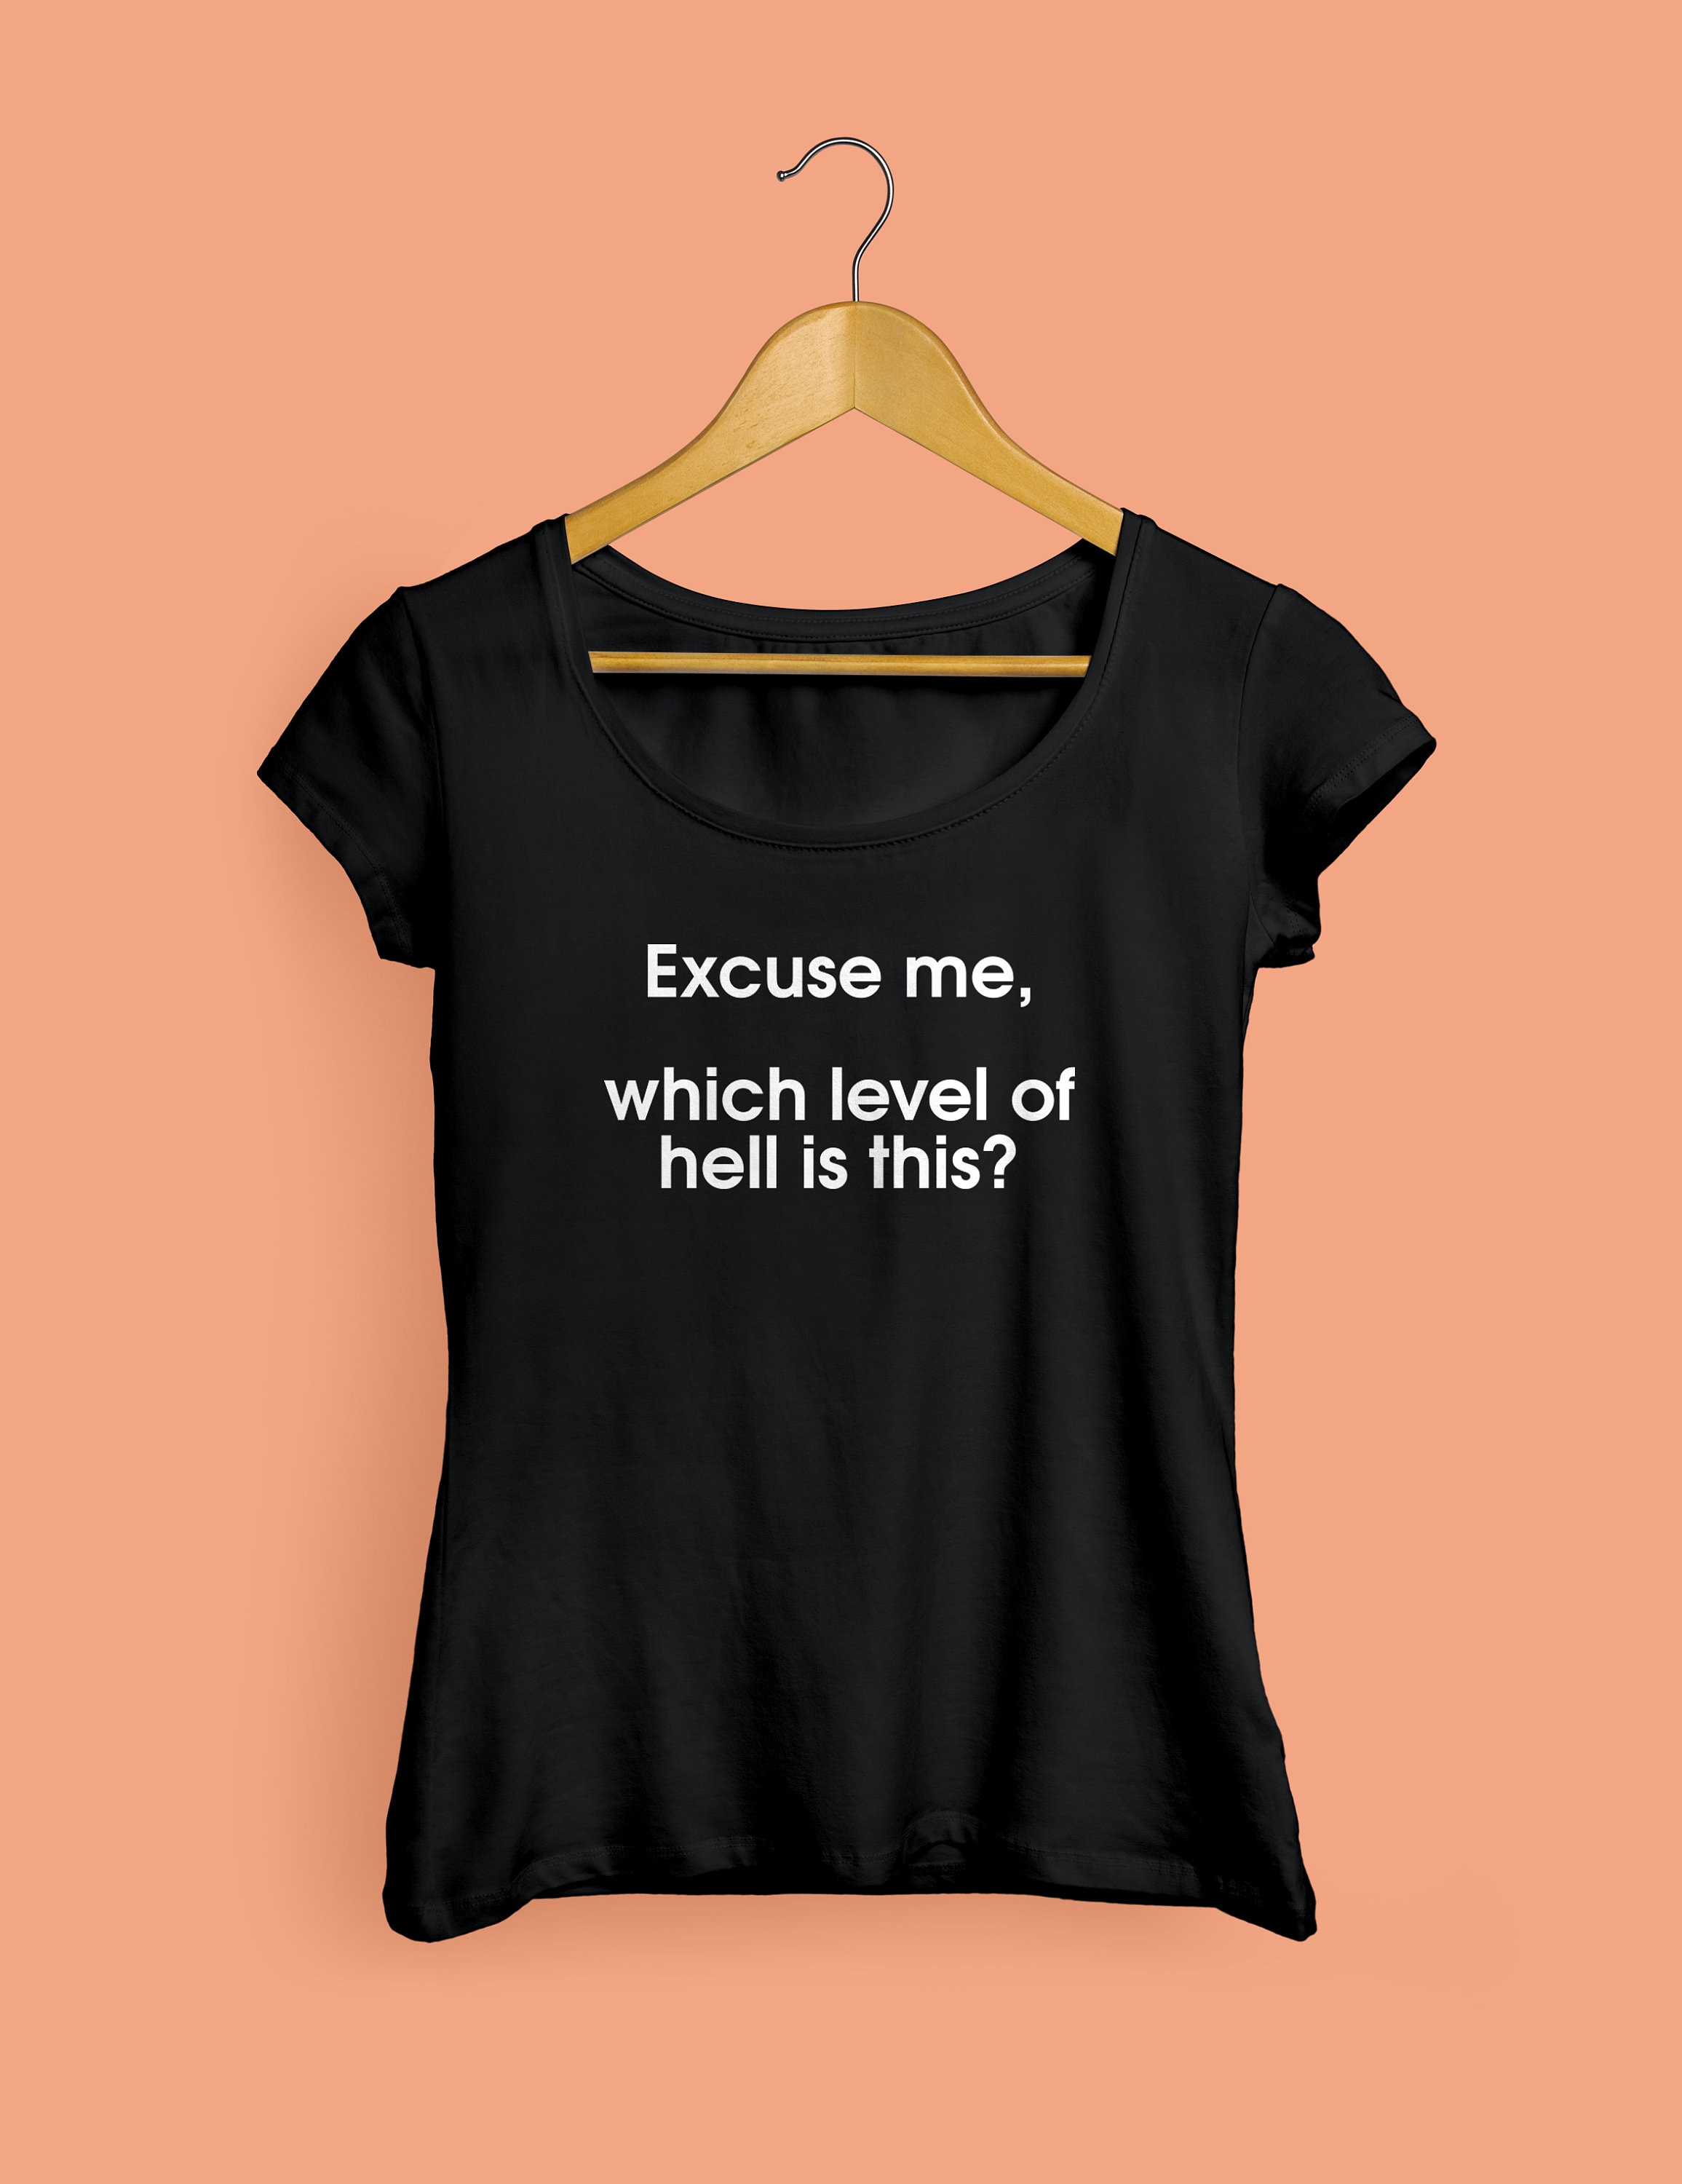 Women's Tee What level of HELL is this? Excuse Me